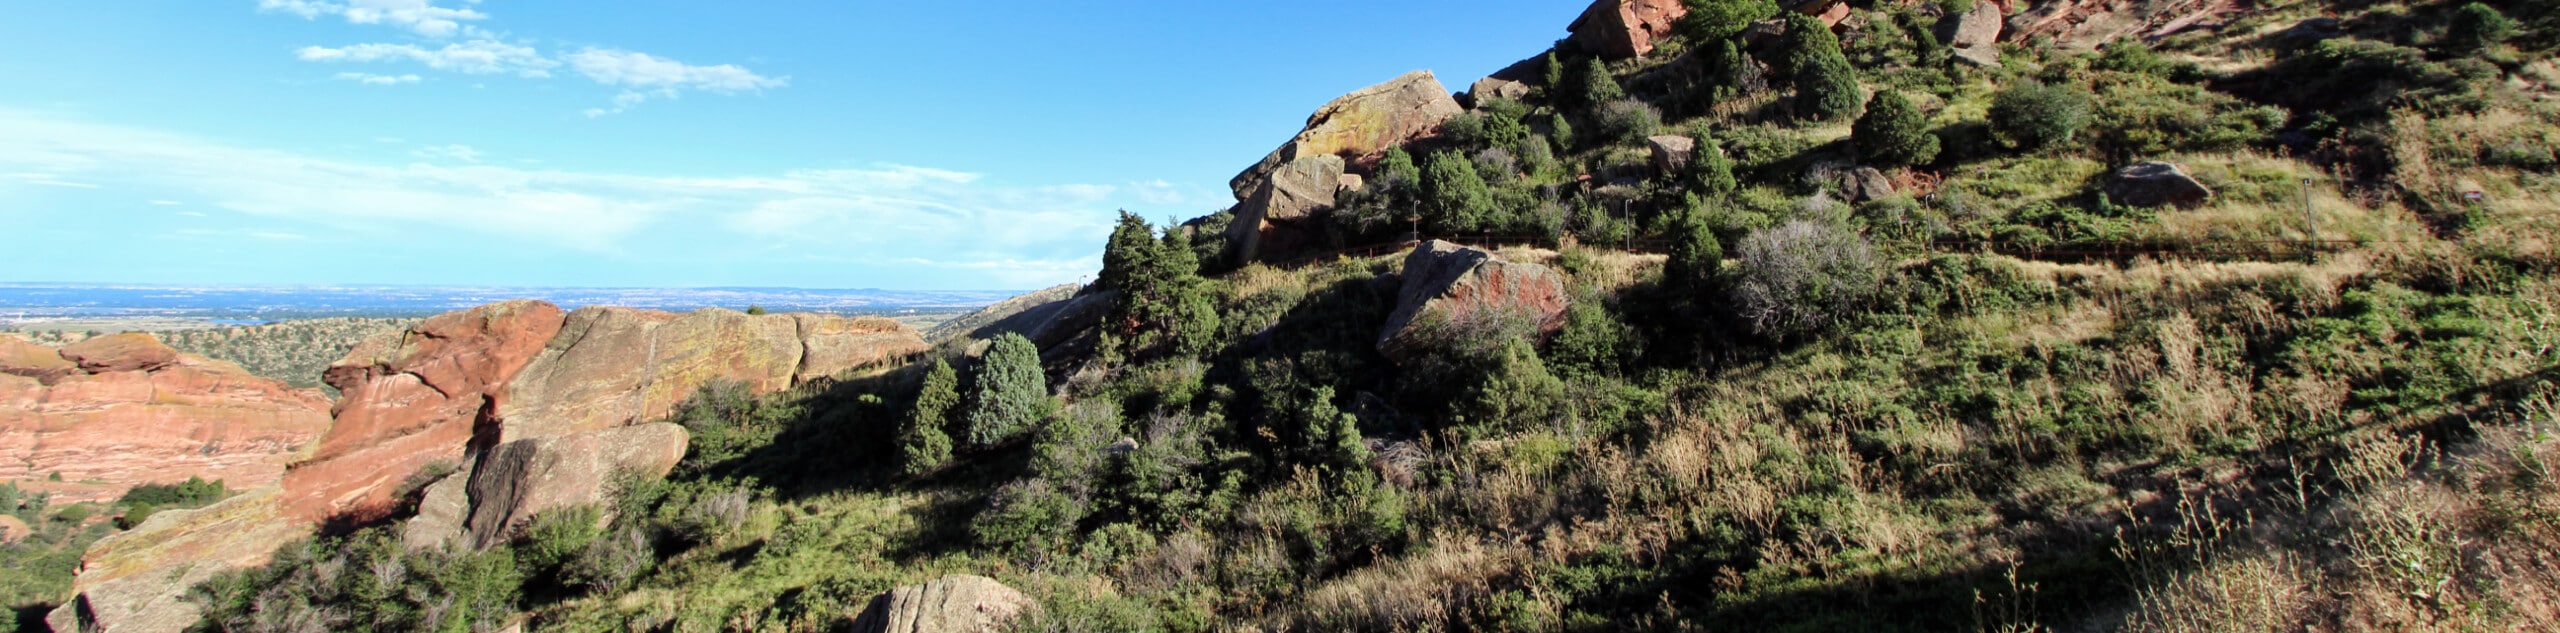 Gregory Canyon and Amphitheatre Loop Trail